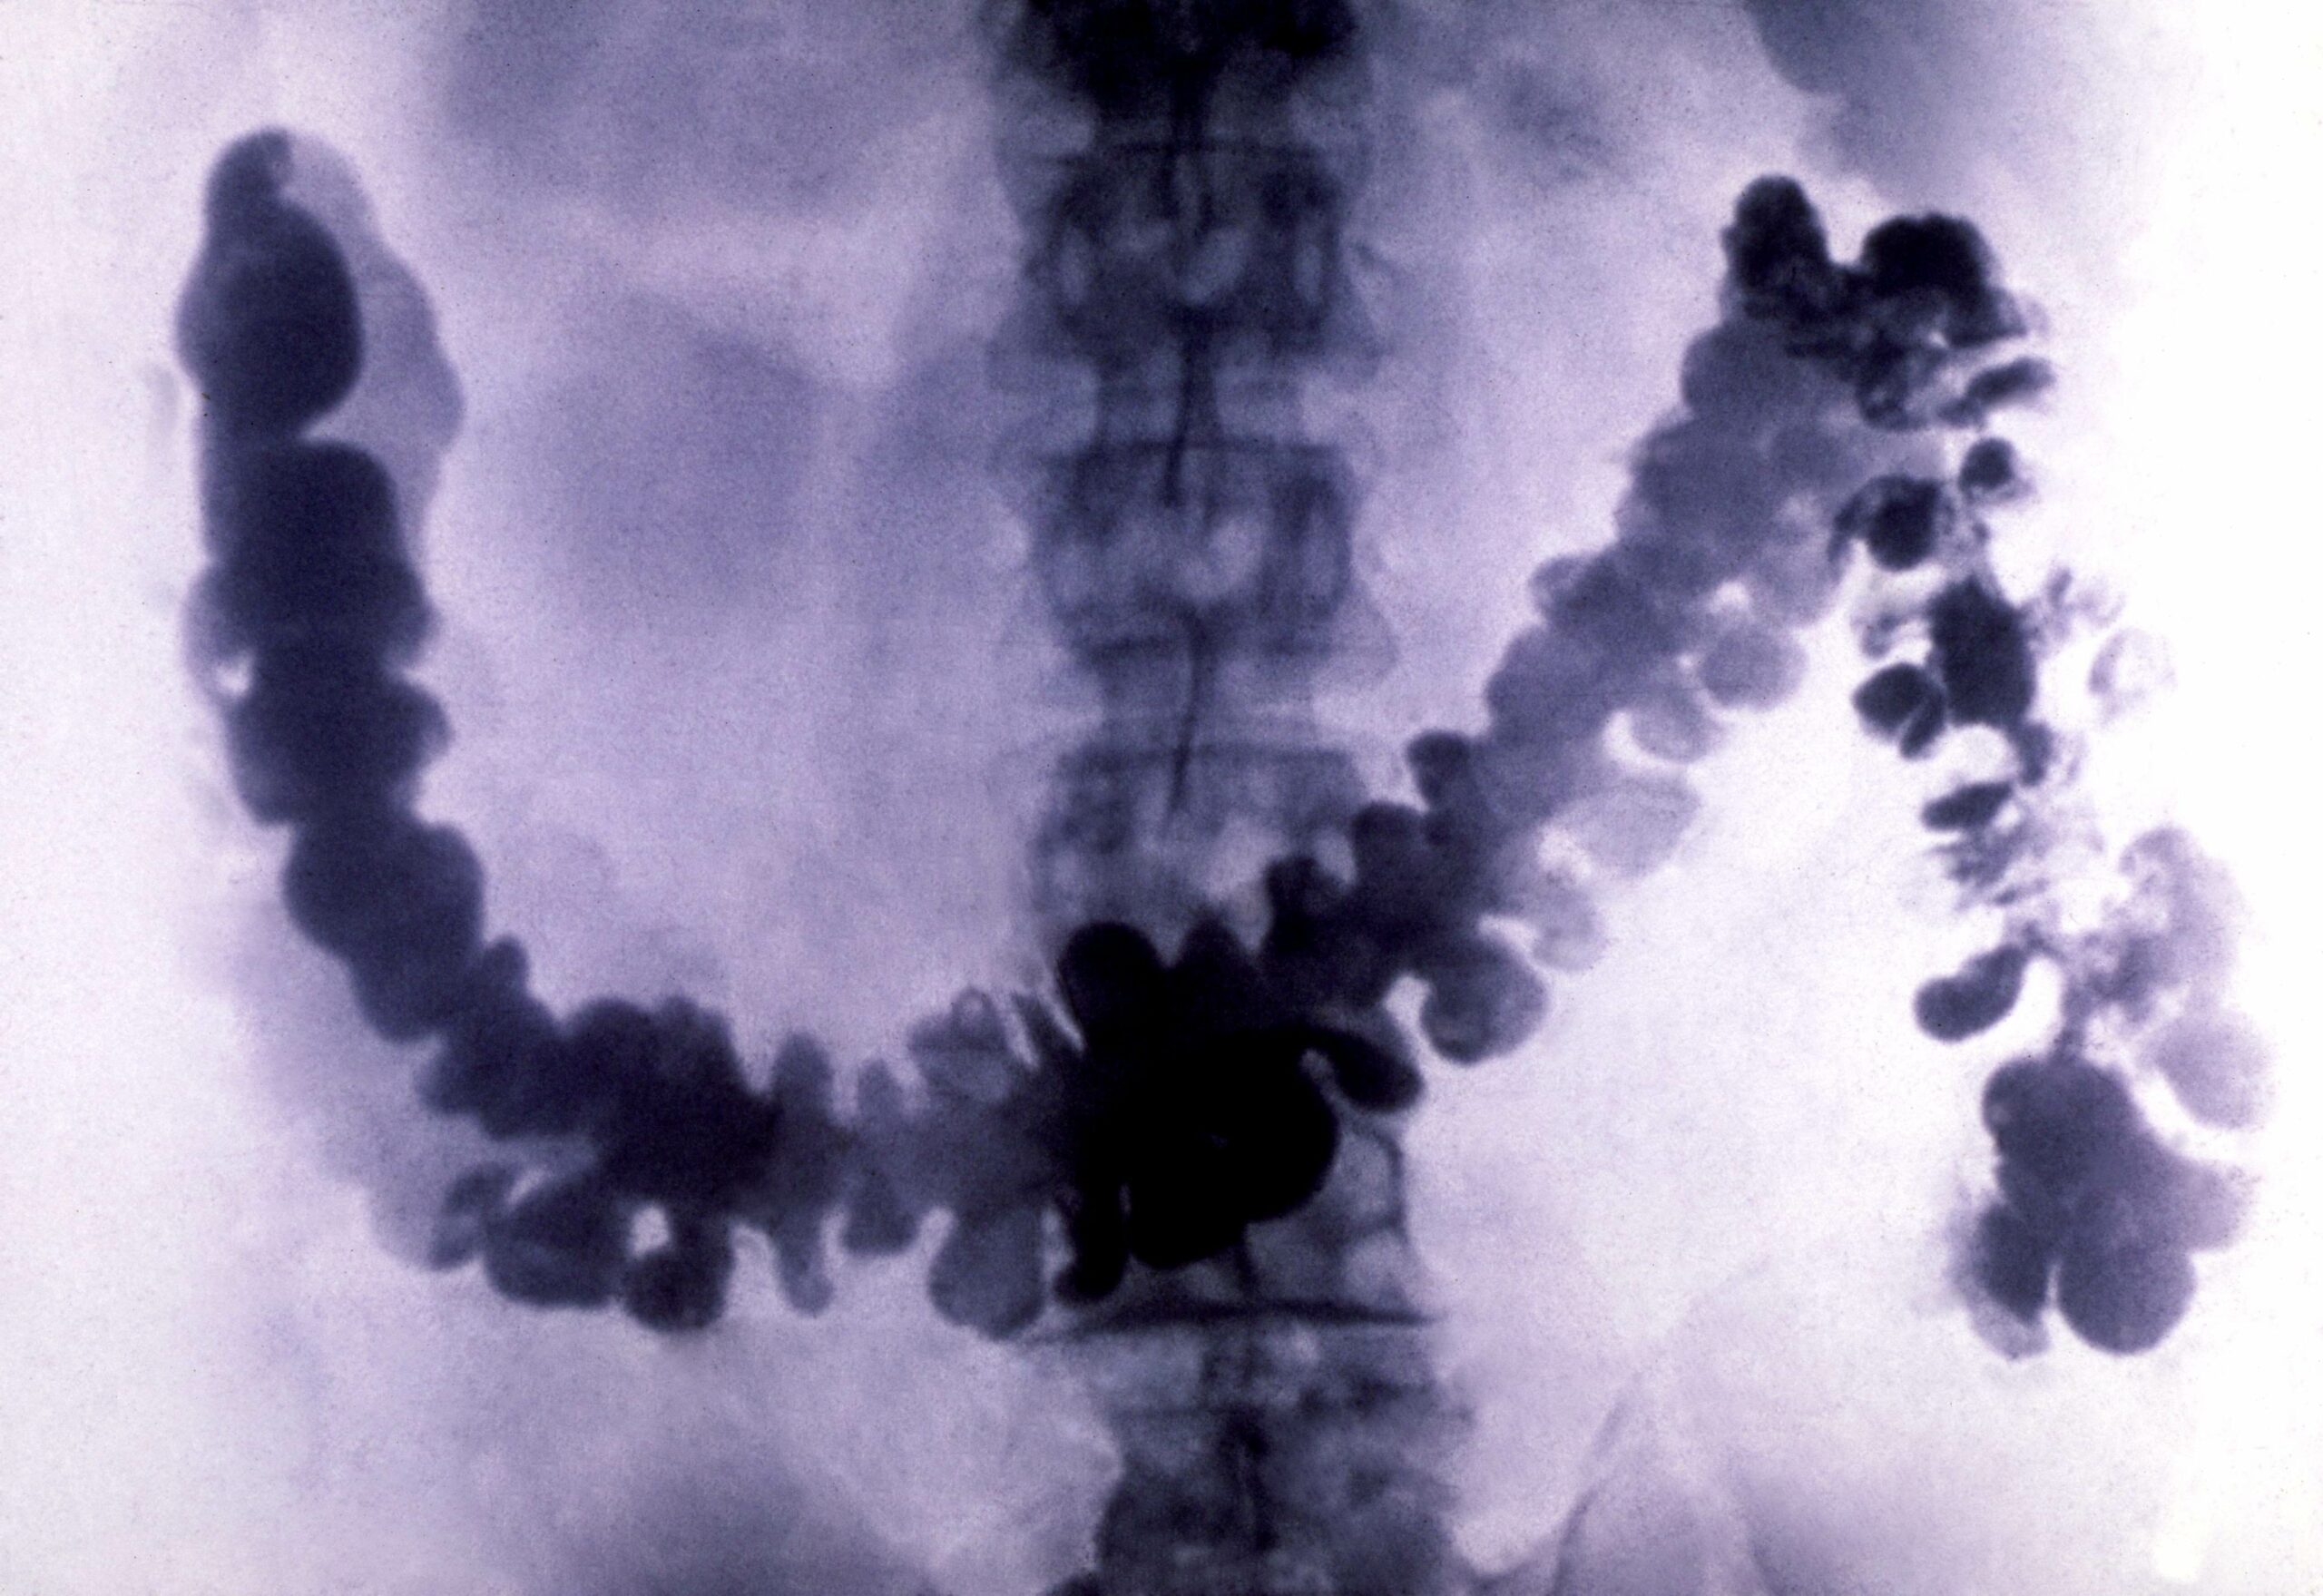 Colon and rectal cancer seem to be on the rise—in millennials